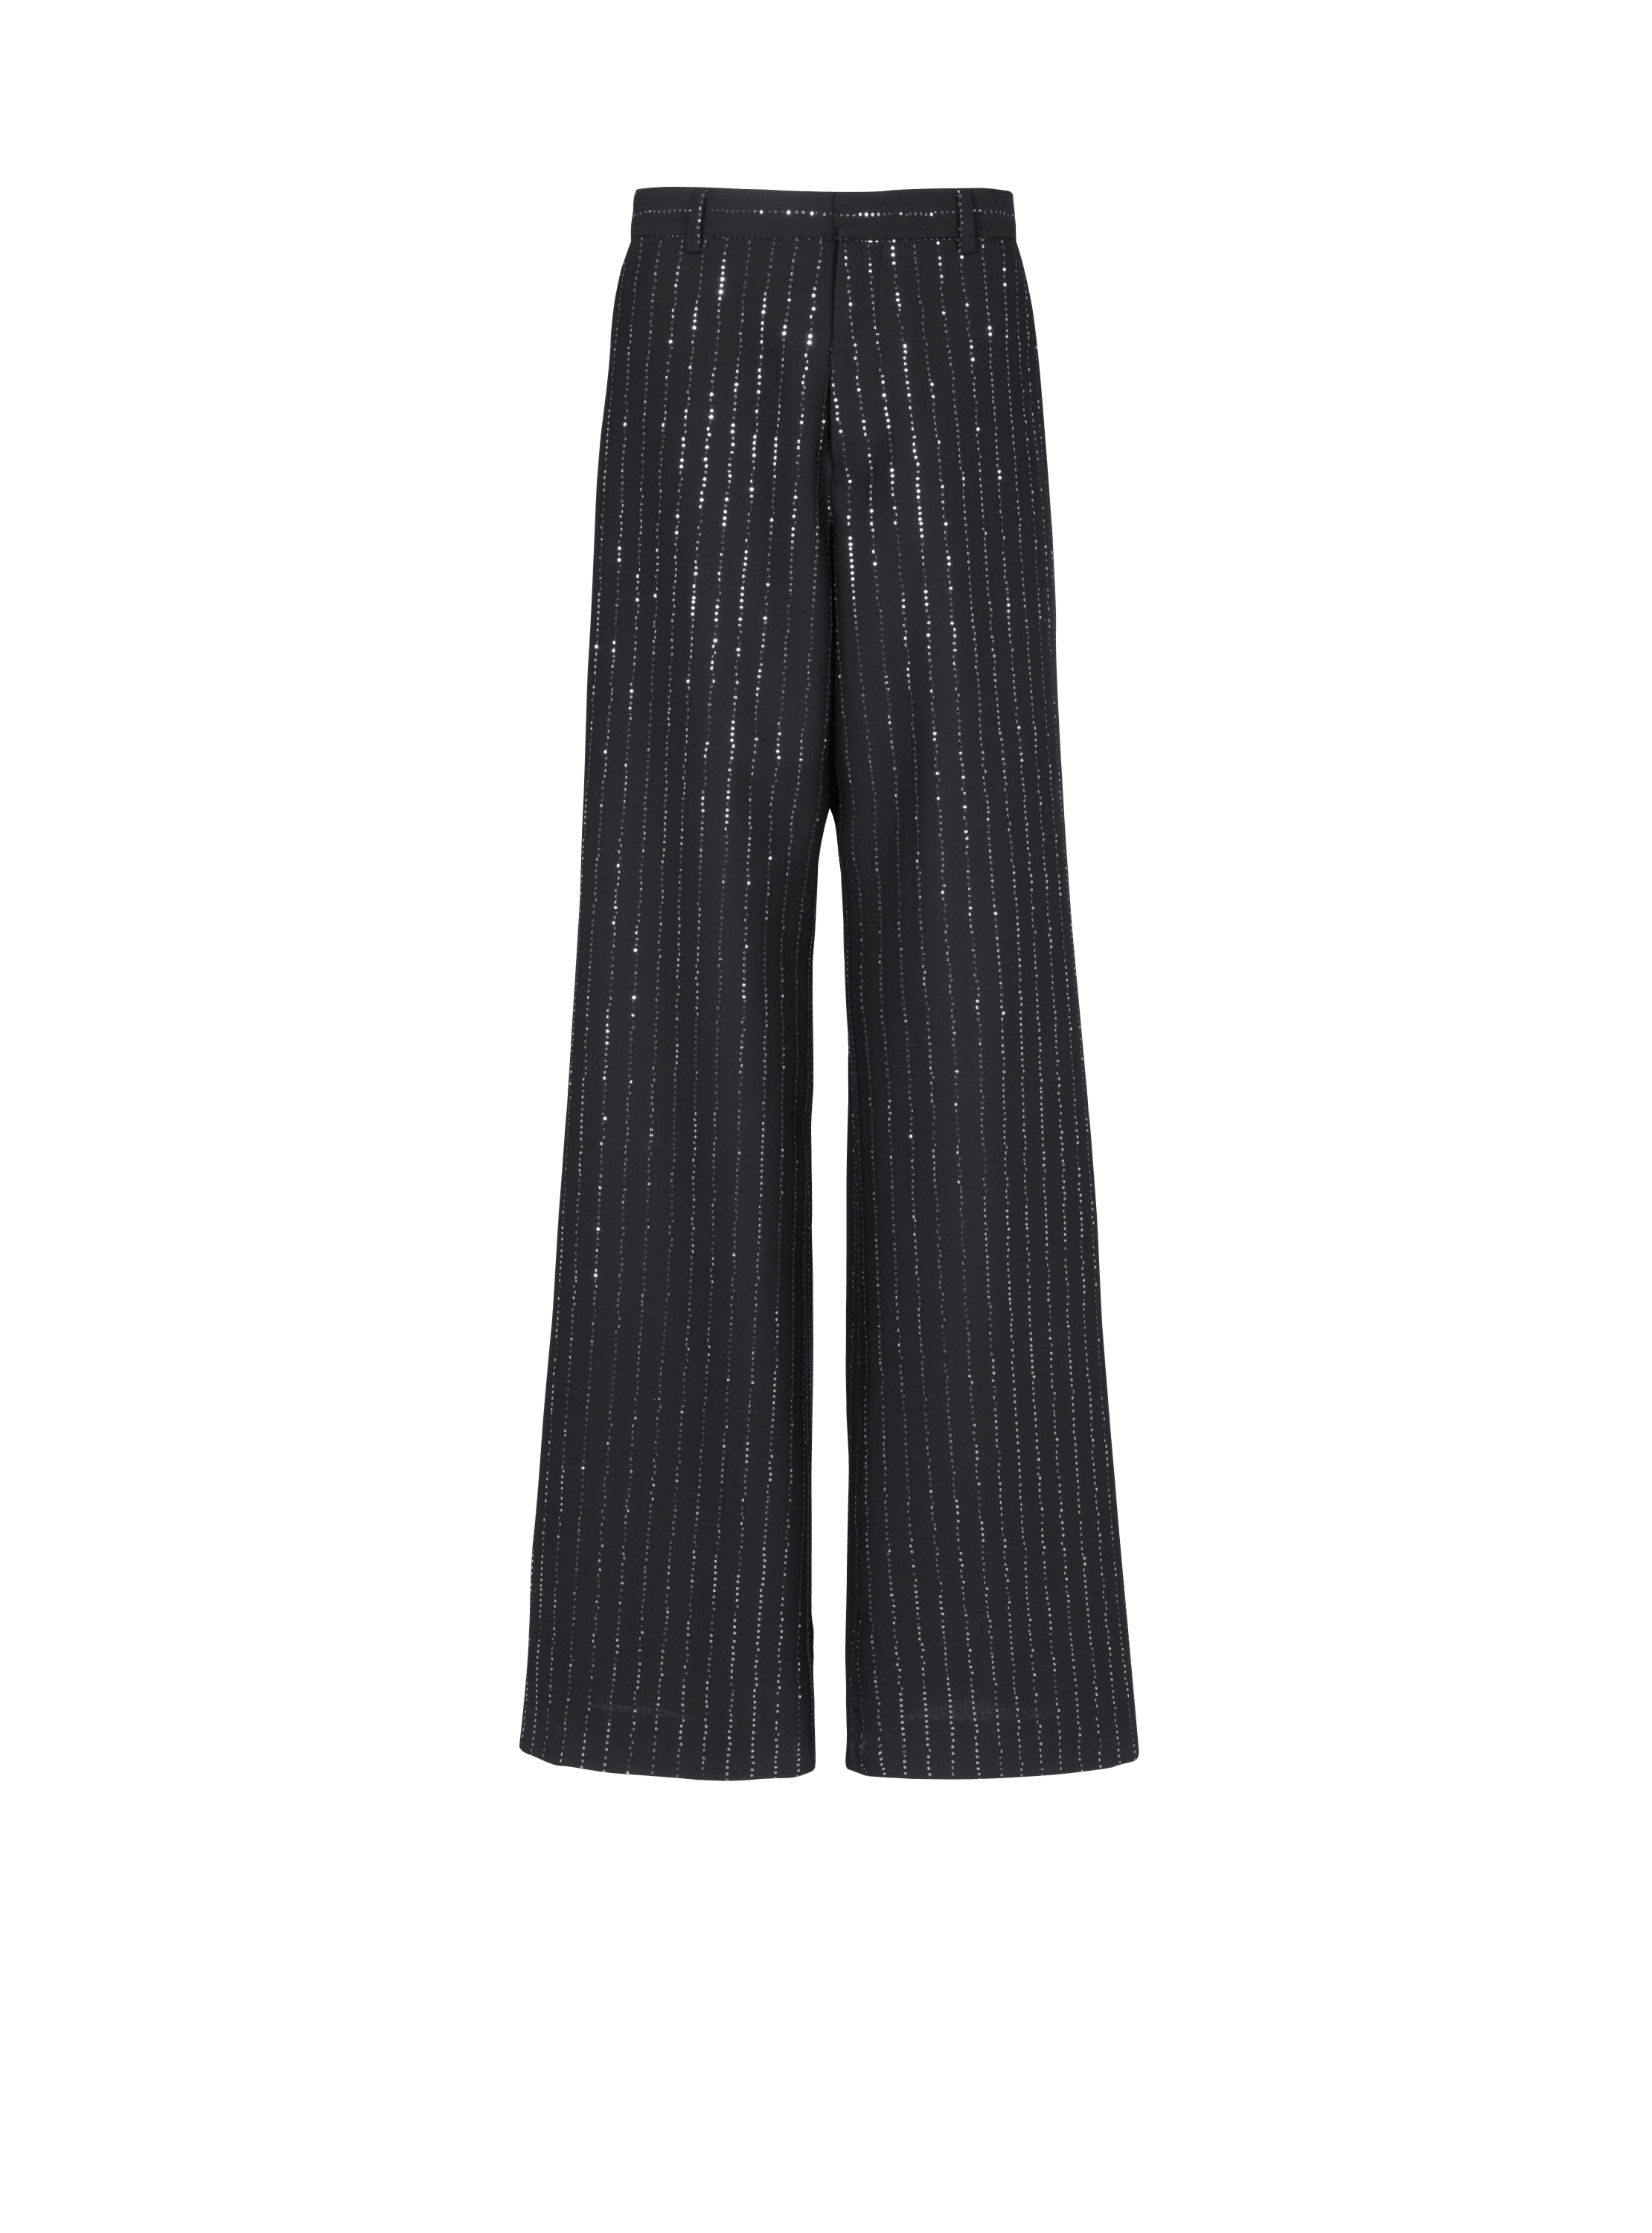 Trousers with sequin stripes, black, hi-res